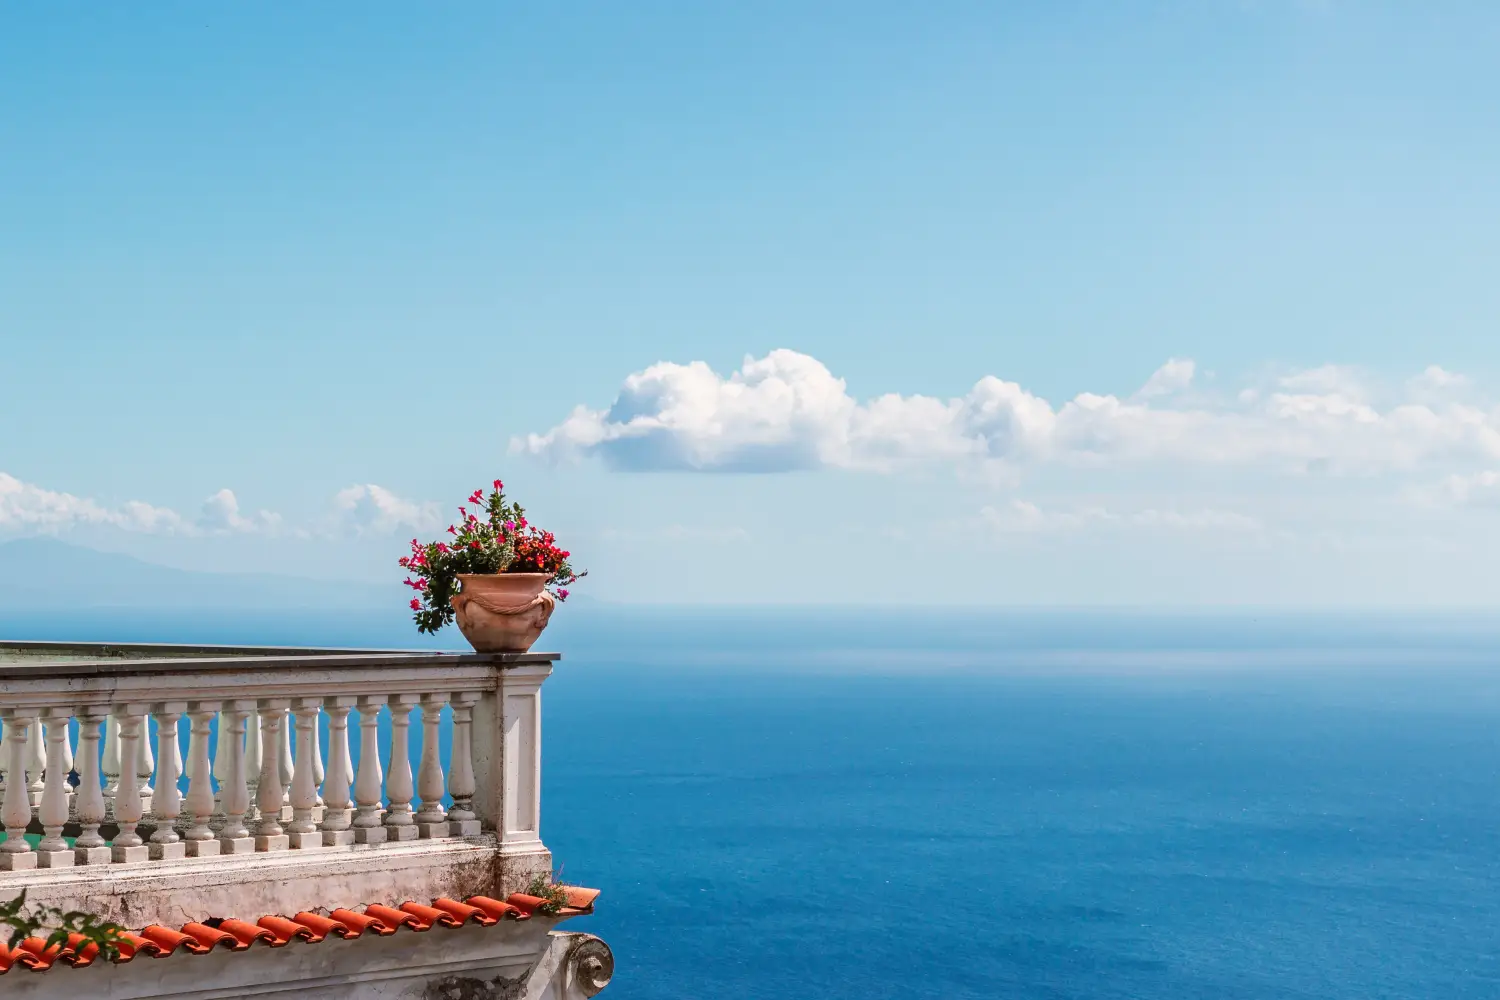 Ferry to Amalfi - A stunning view over the Amalfi Coast in Italy. A terrace overlooking the sea.